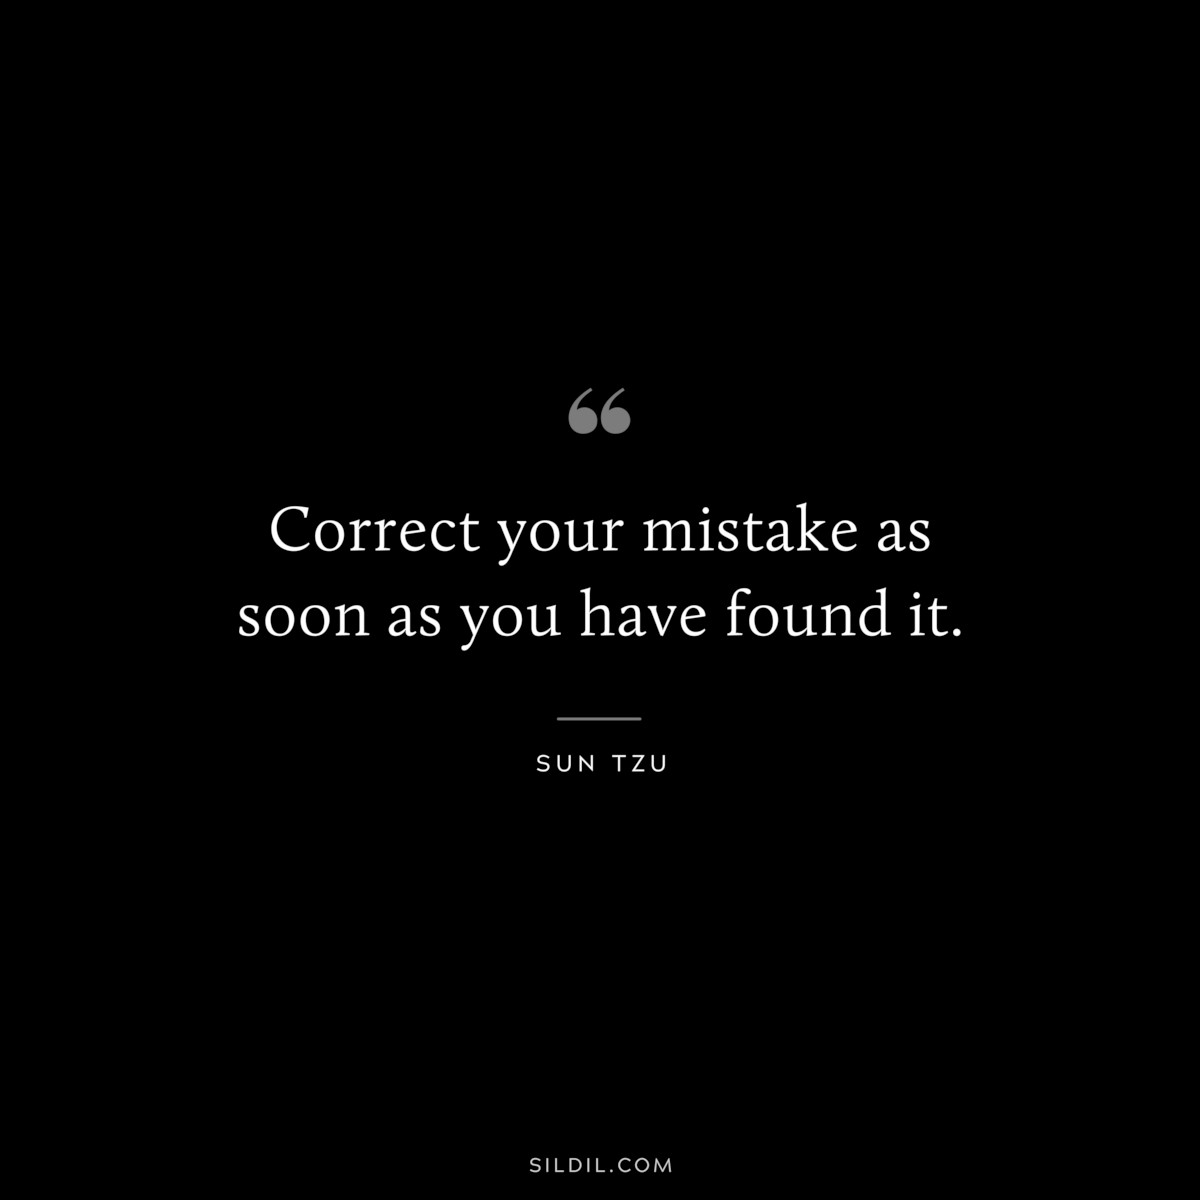 Correct your mistake as soon as you have found it.― Sun Tzu